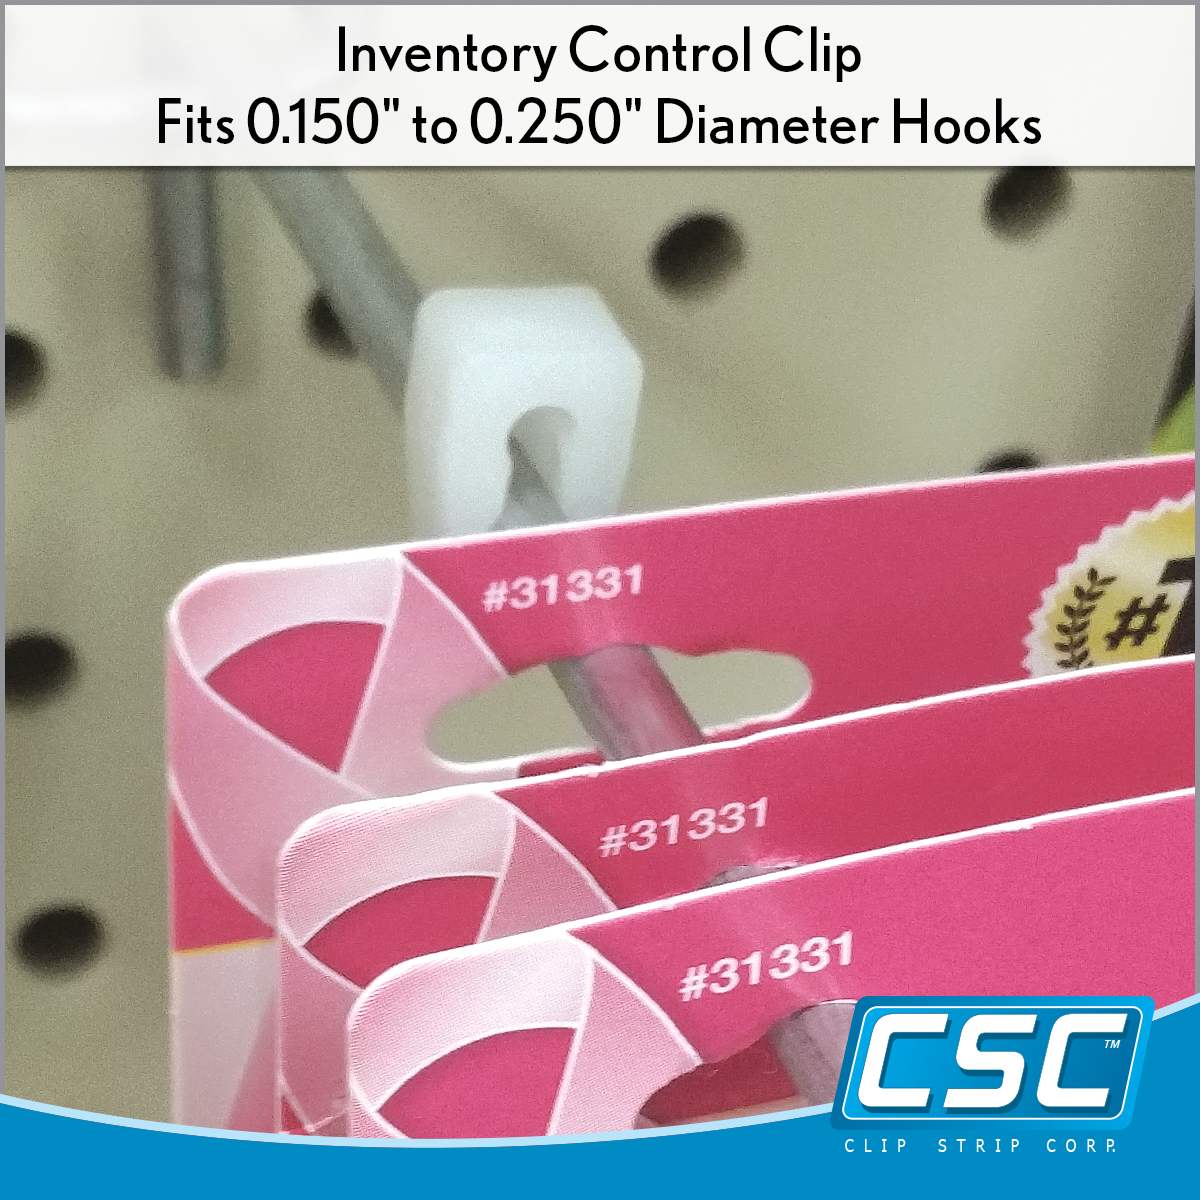 Black Peg Hook Stoppers, Squeeze & Pinch Inventory Control Clips